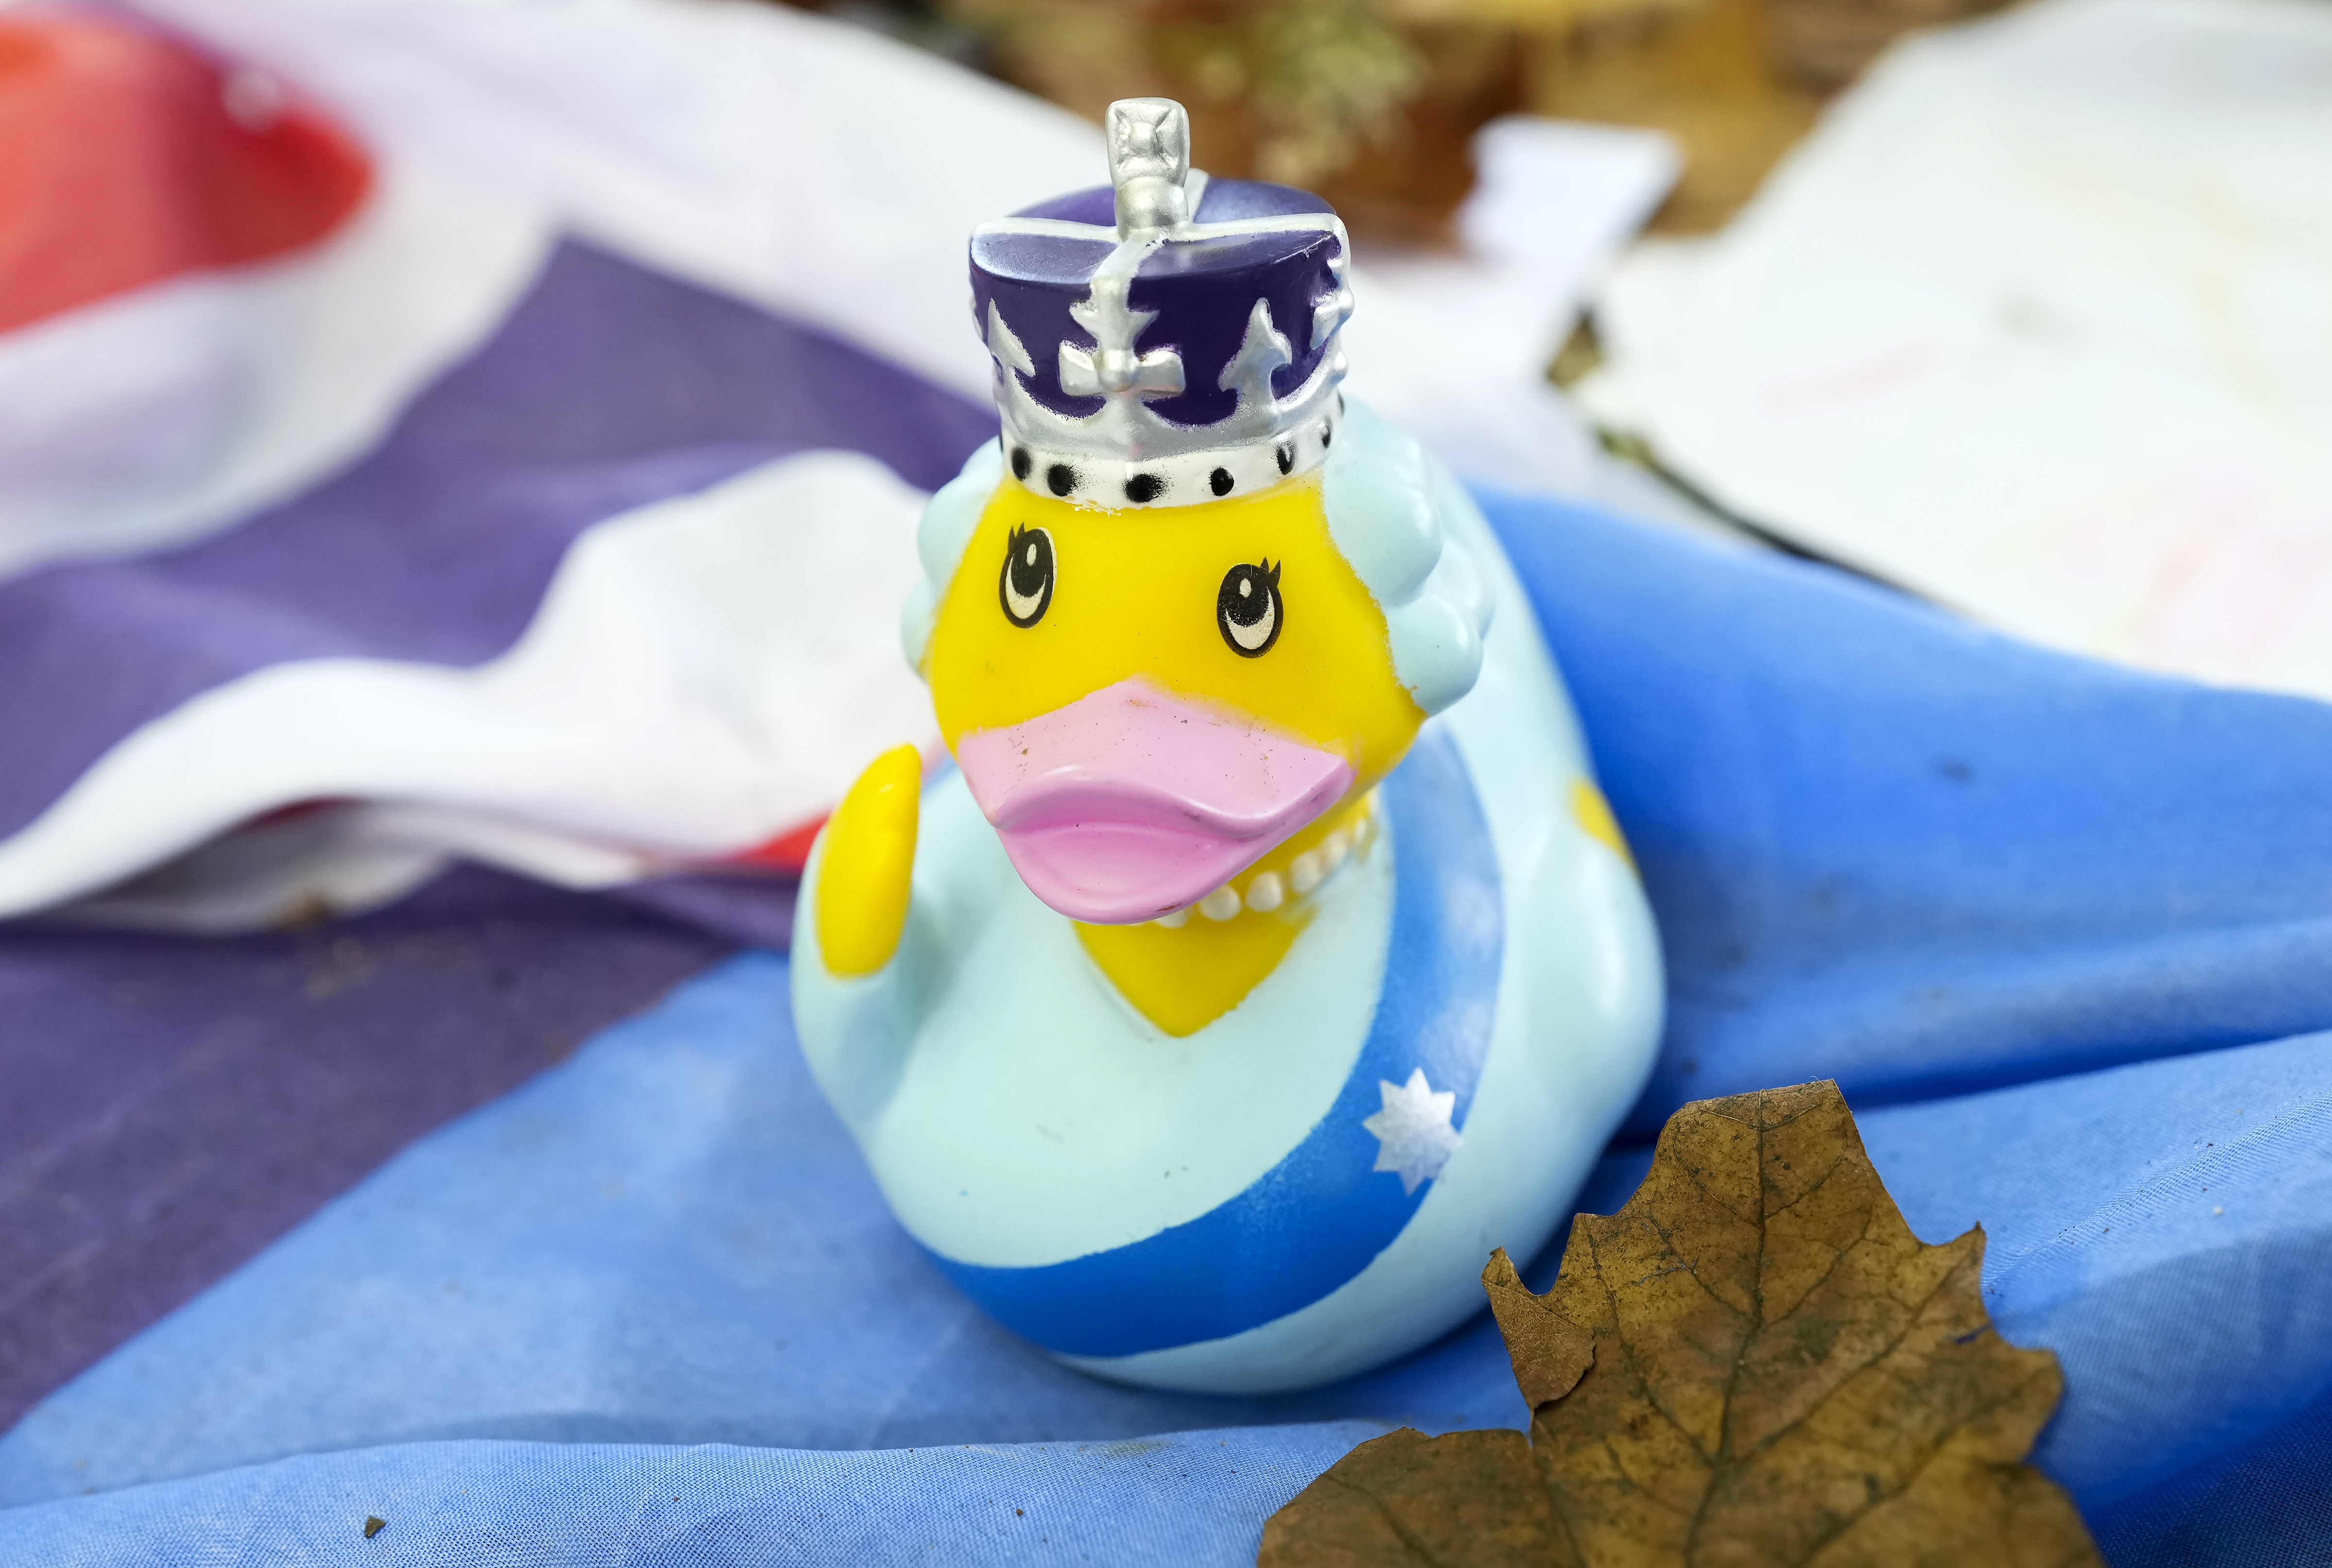 Queen Elizabeth Marmalade sandwiches, rubber ducks and flamingoes left at London tribute picture